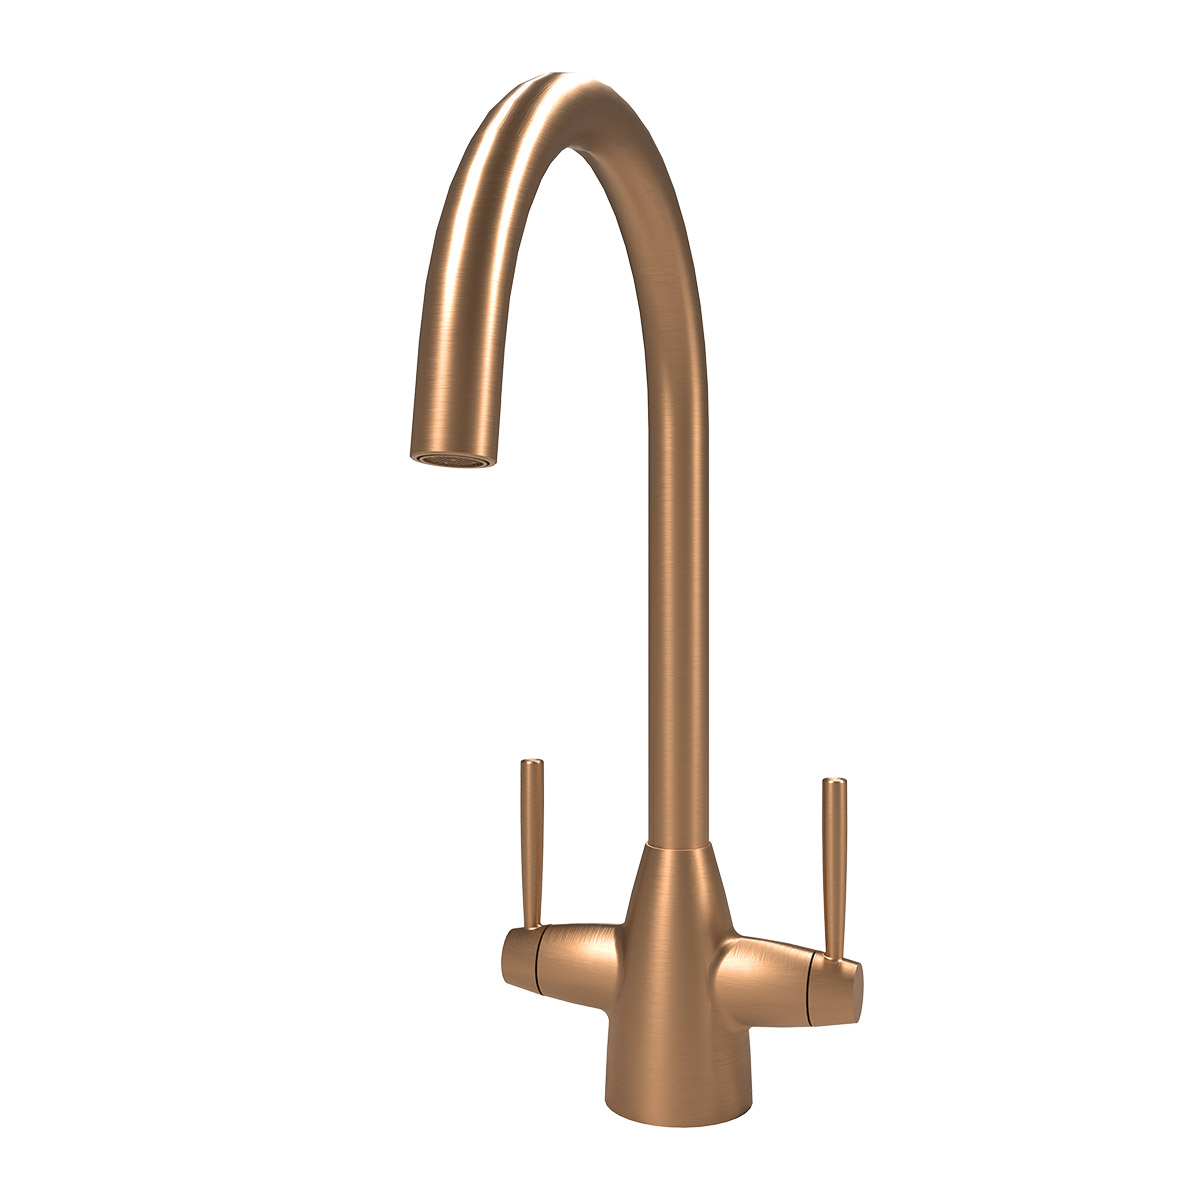 Ivy Monobloc Mixer Tap - Brushed Red Gold